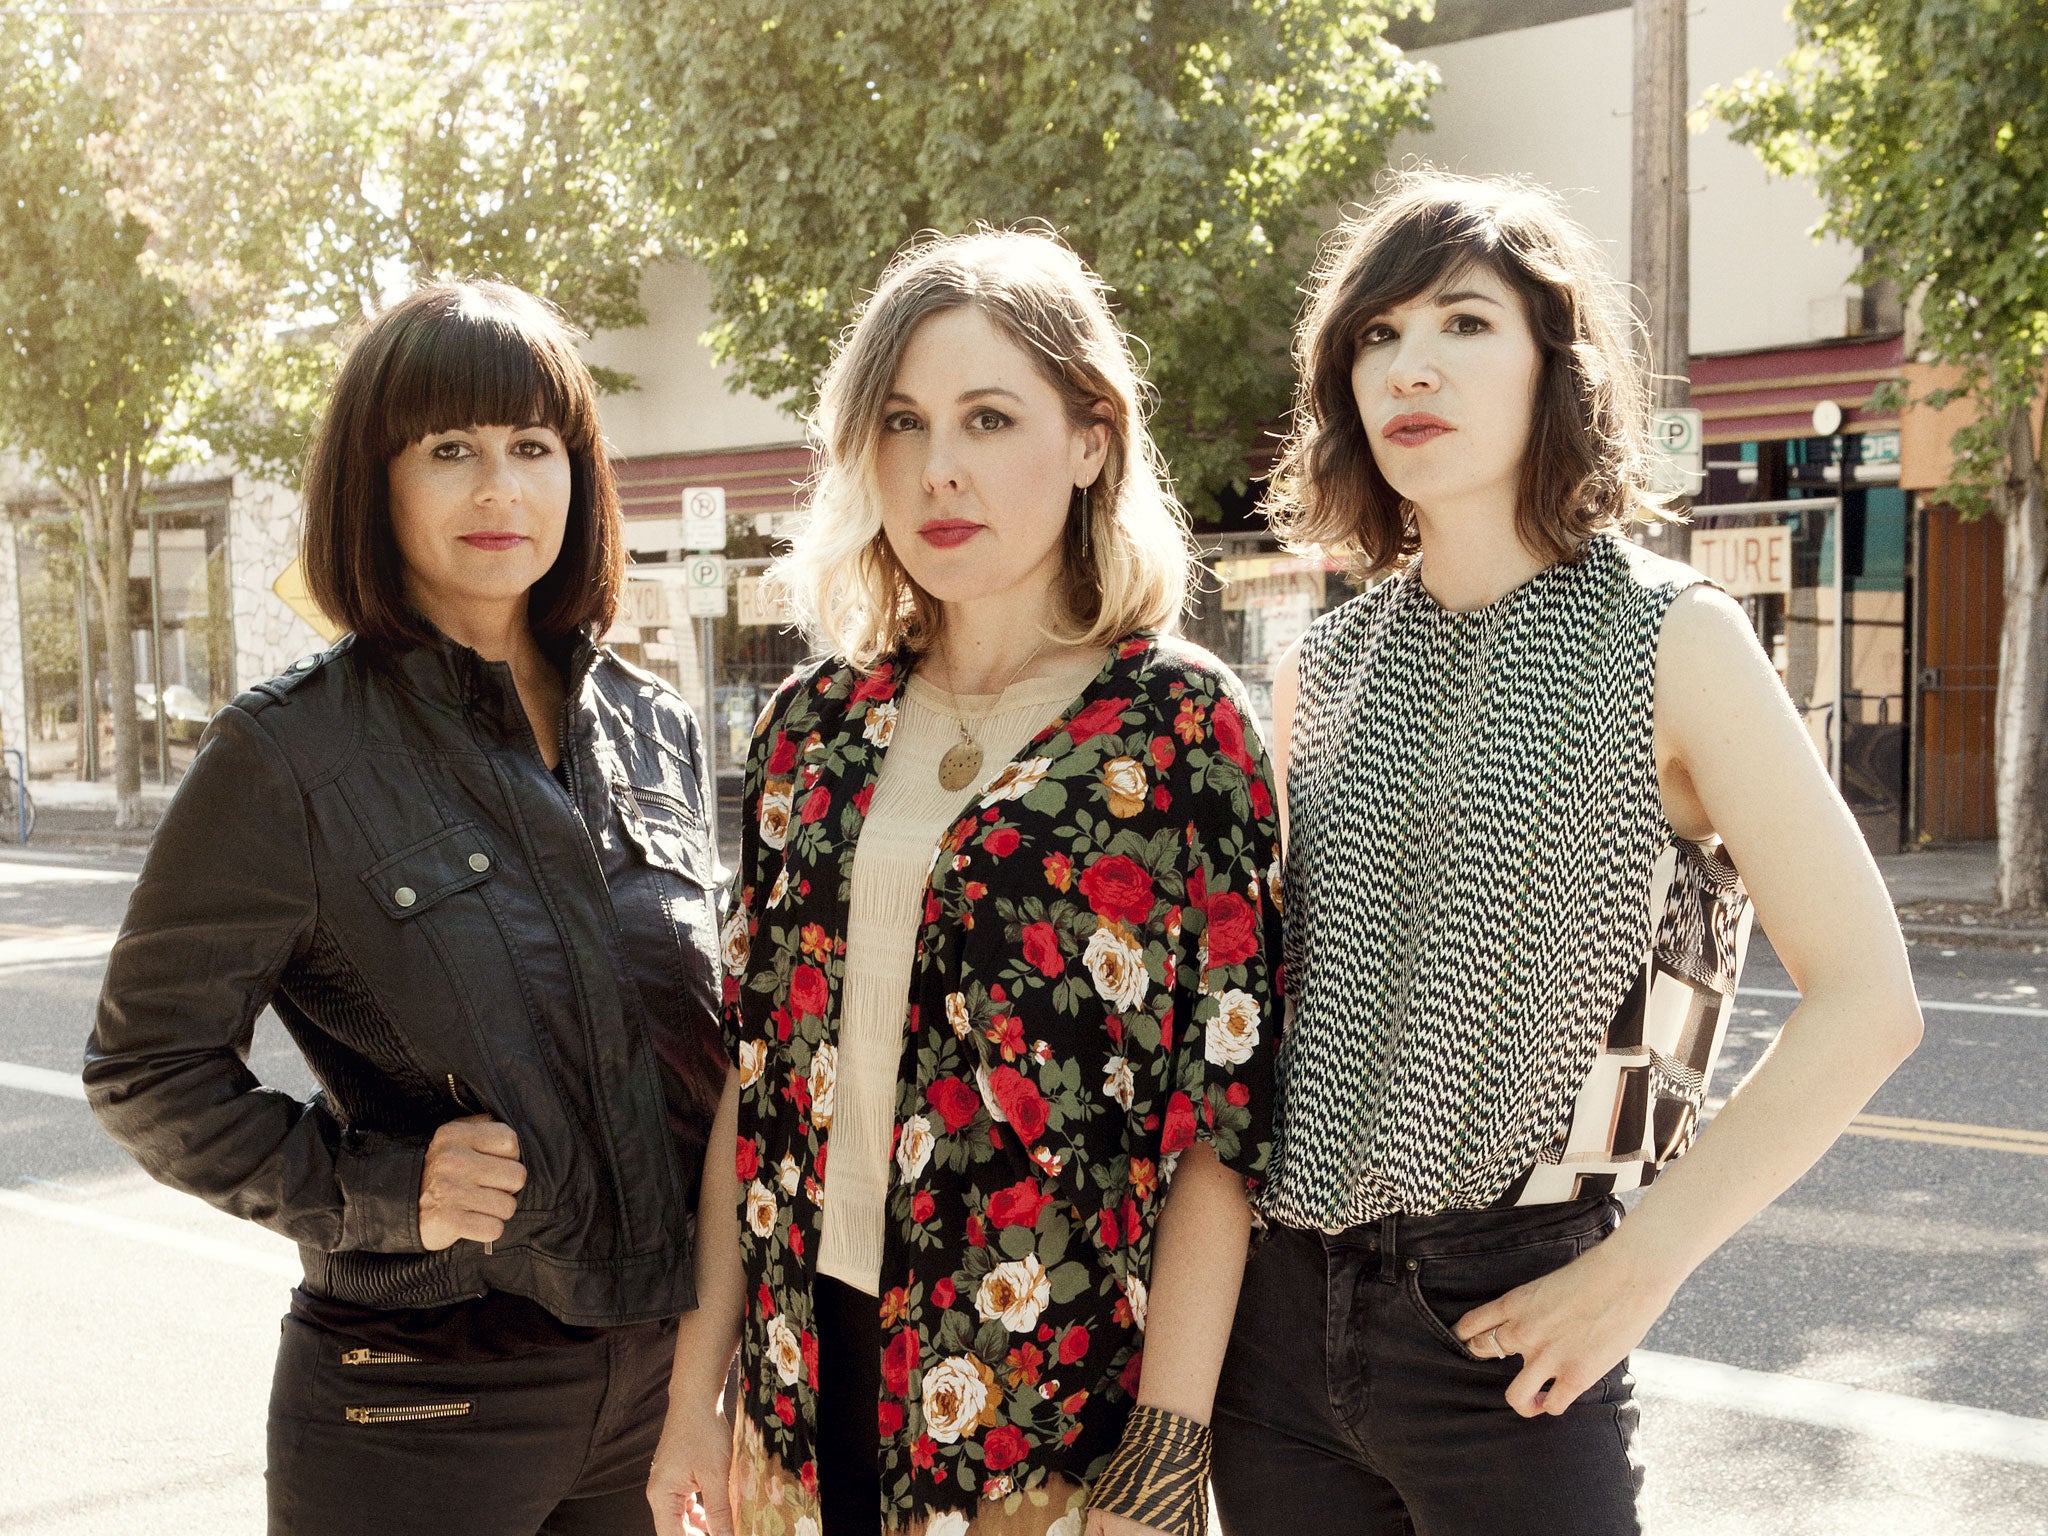 L to R: Janet Weiss, Corin Tucker and Carrie Brownstein, the three members of Sleater-Kinney